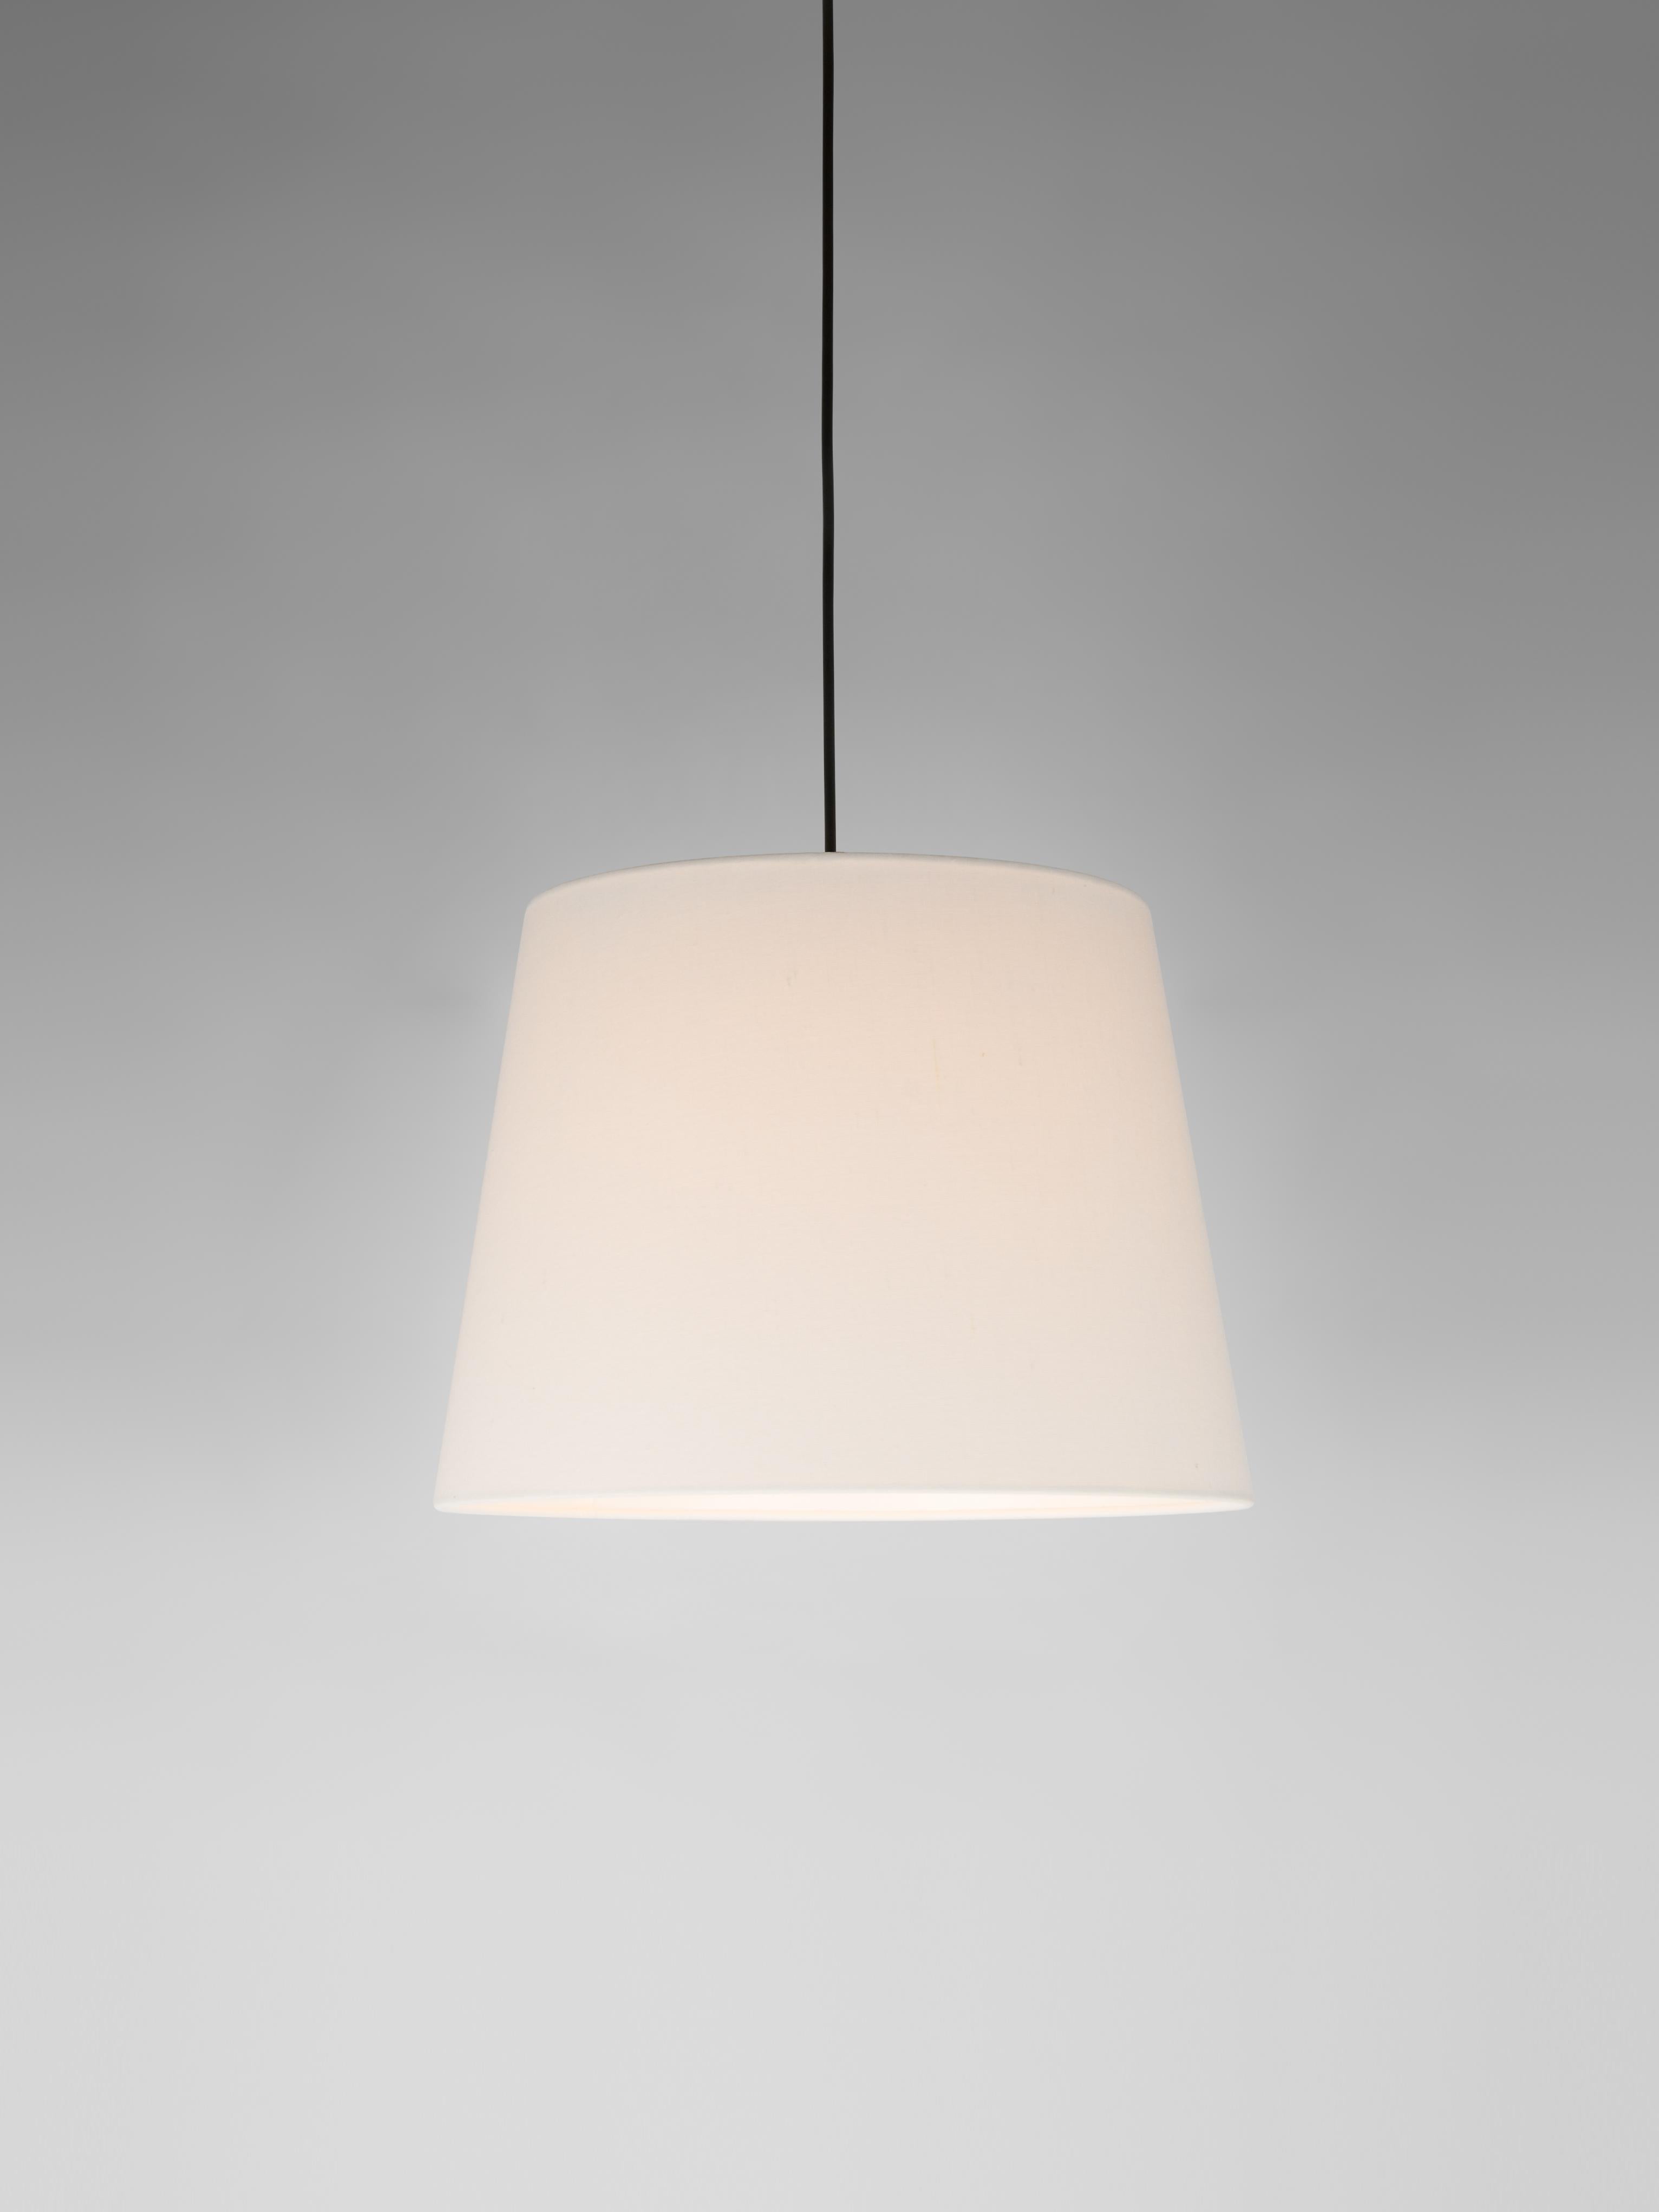 White Sísísí Cónicas GT3 pendant lamp by Santa & Cole
Dimensions: D 36 x H 27 cm
Materials: Metal, linen.
Available in other colors.

The conical shape group has multiple finishes and sizes. It consists of four sizes: PT1, MT1, GT1 and GT3, and